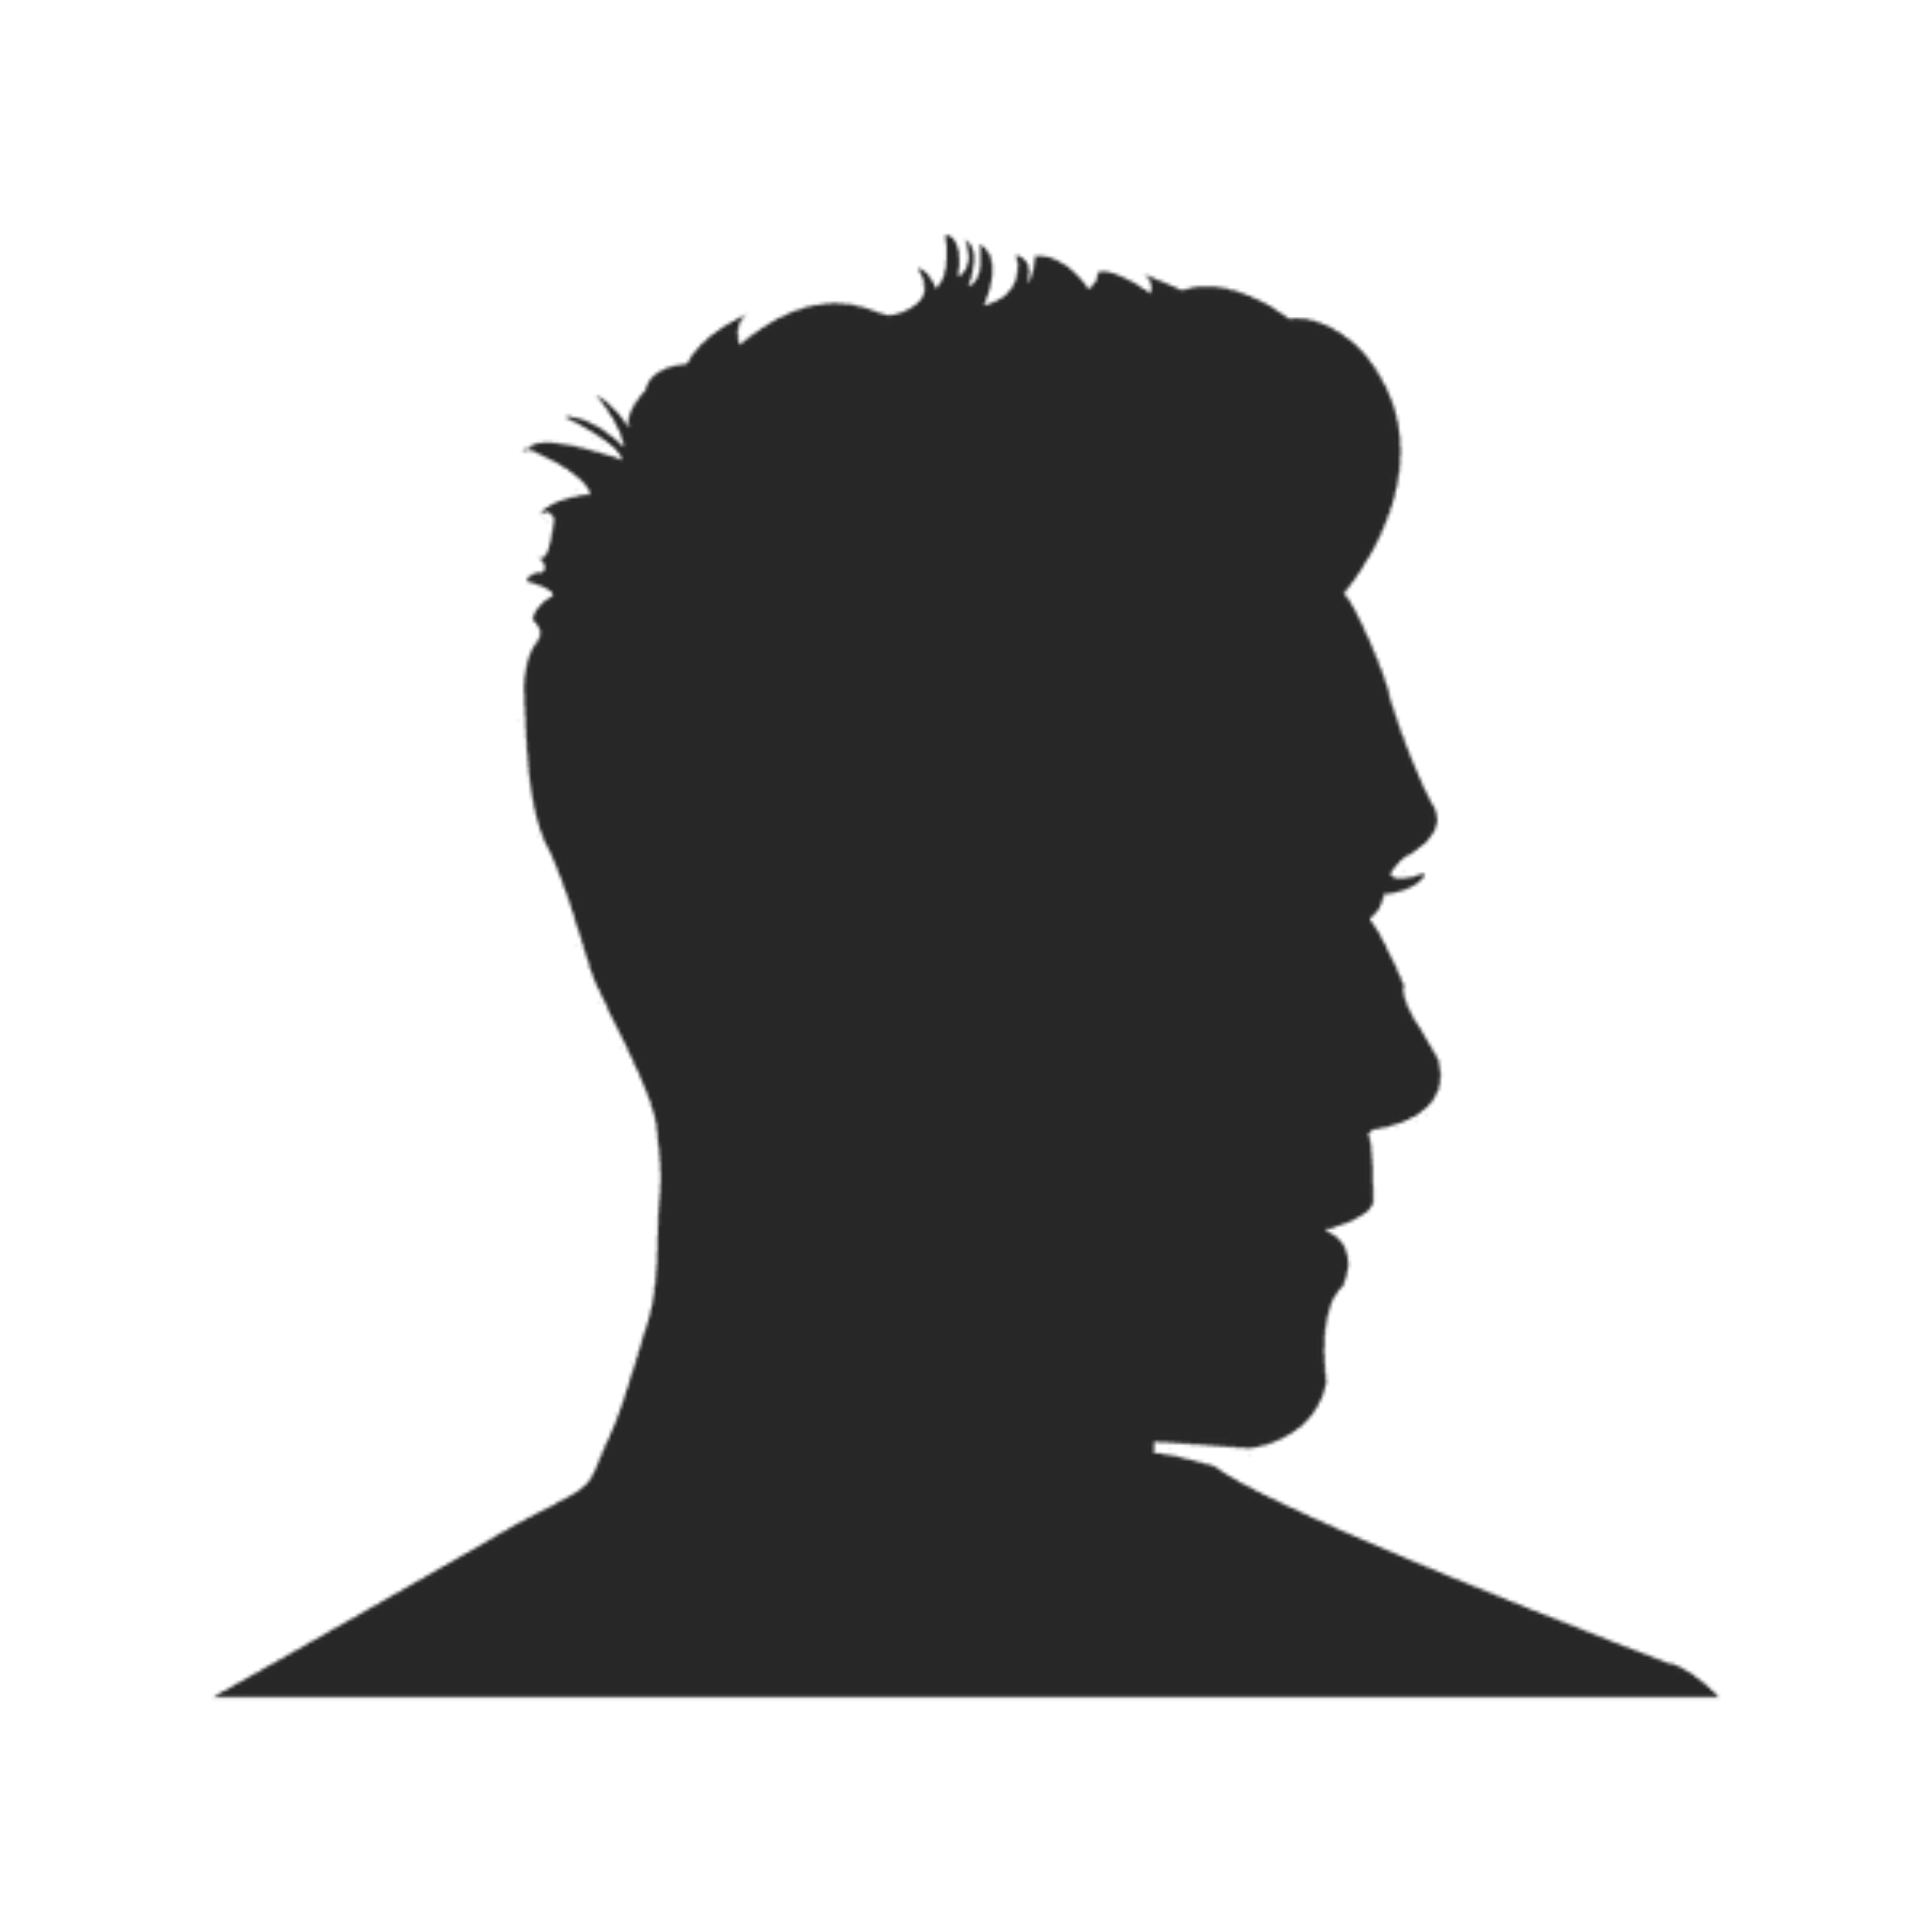 This visual is about man shadow silhouette freetoedit #man #shadow #silhoue...